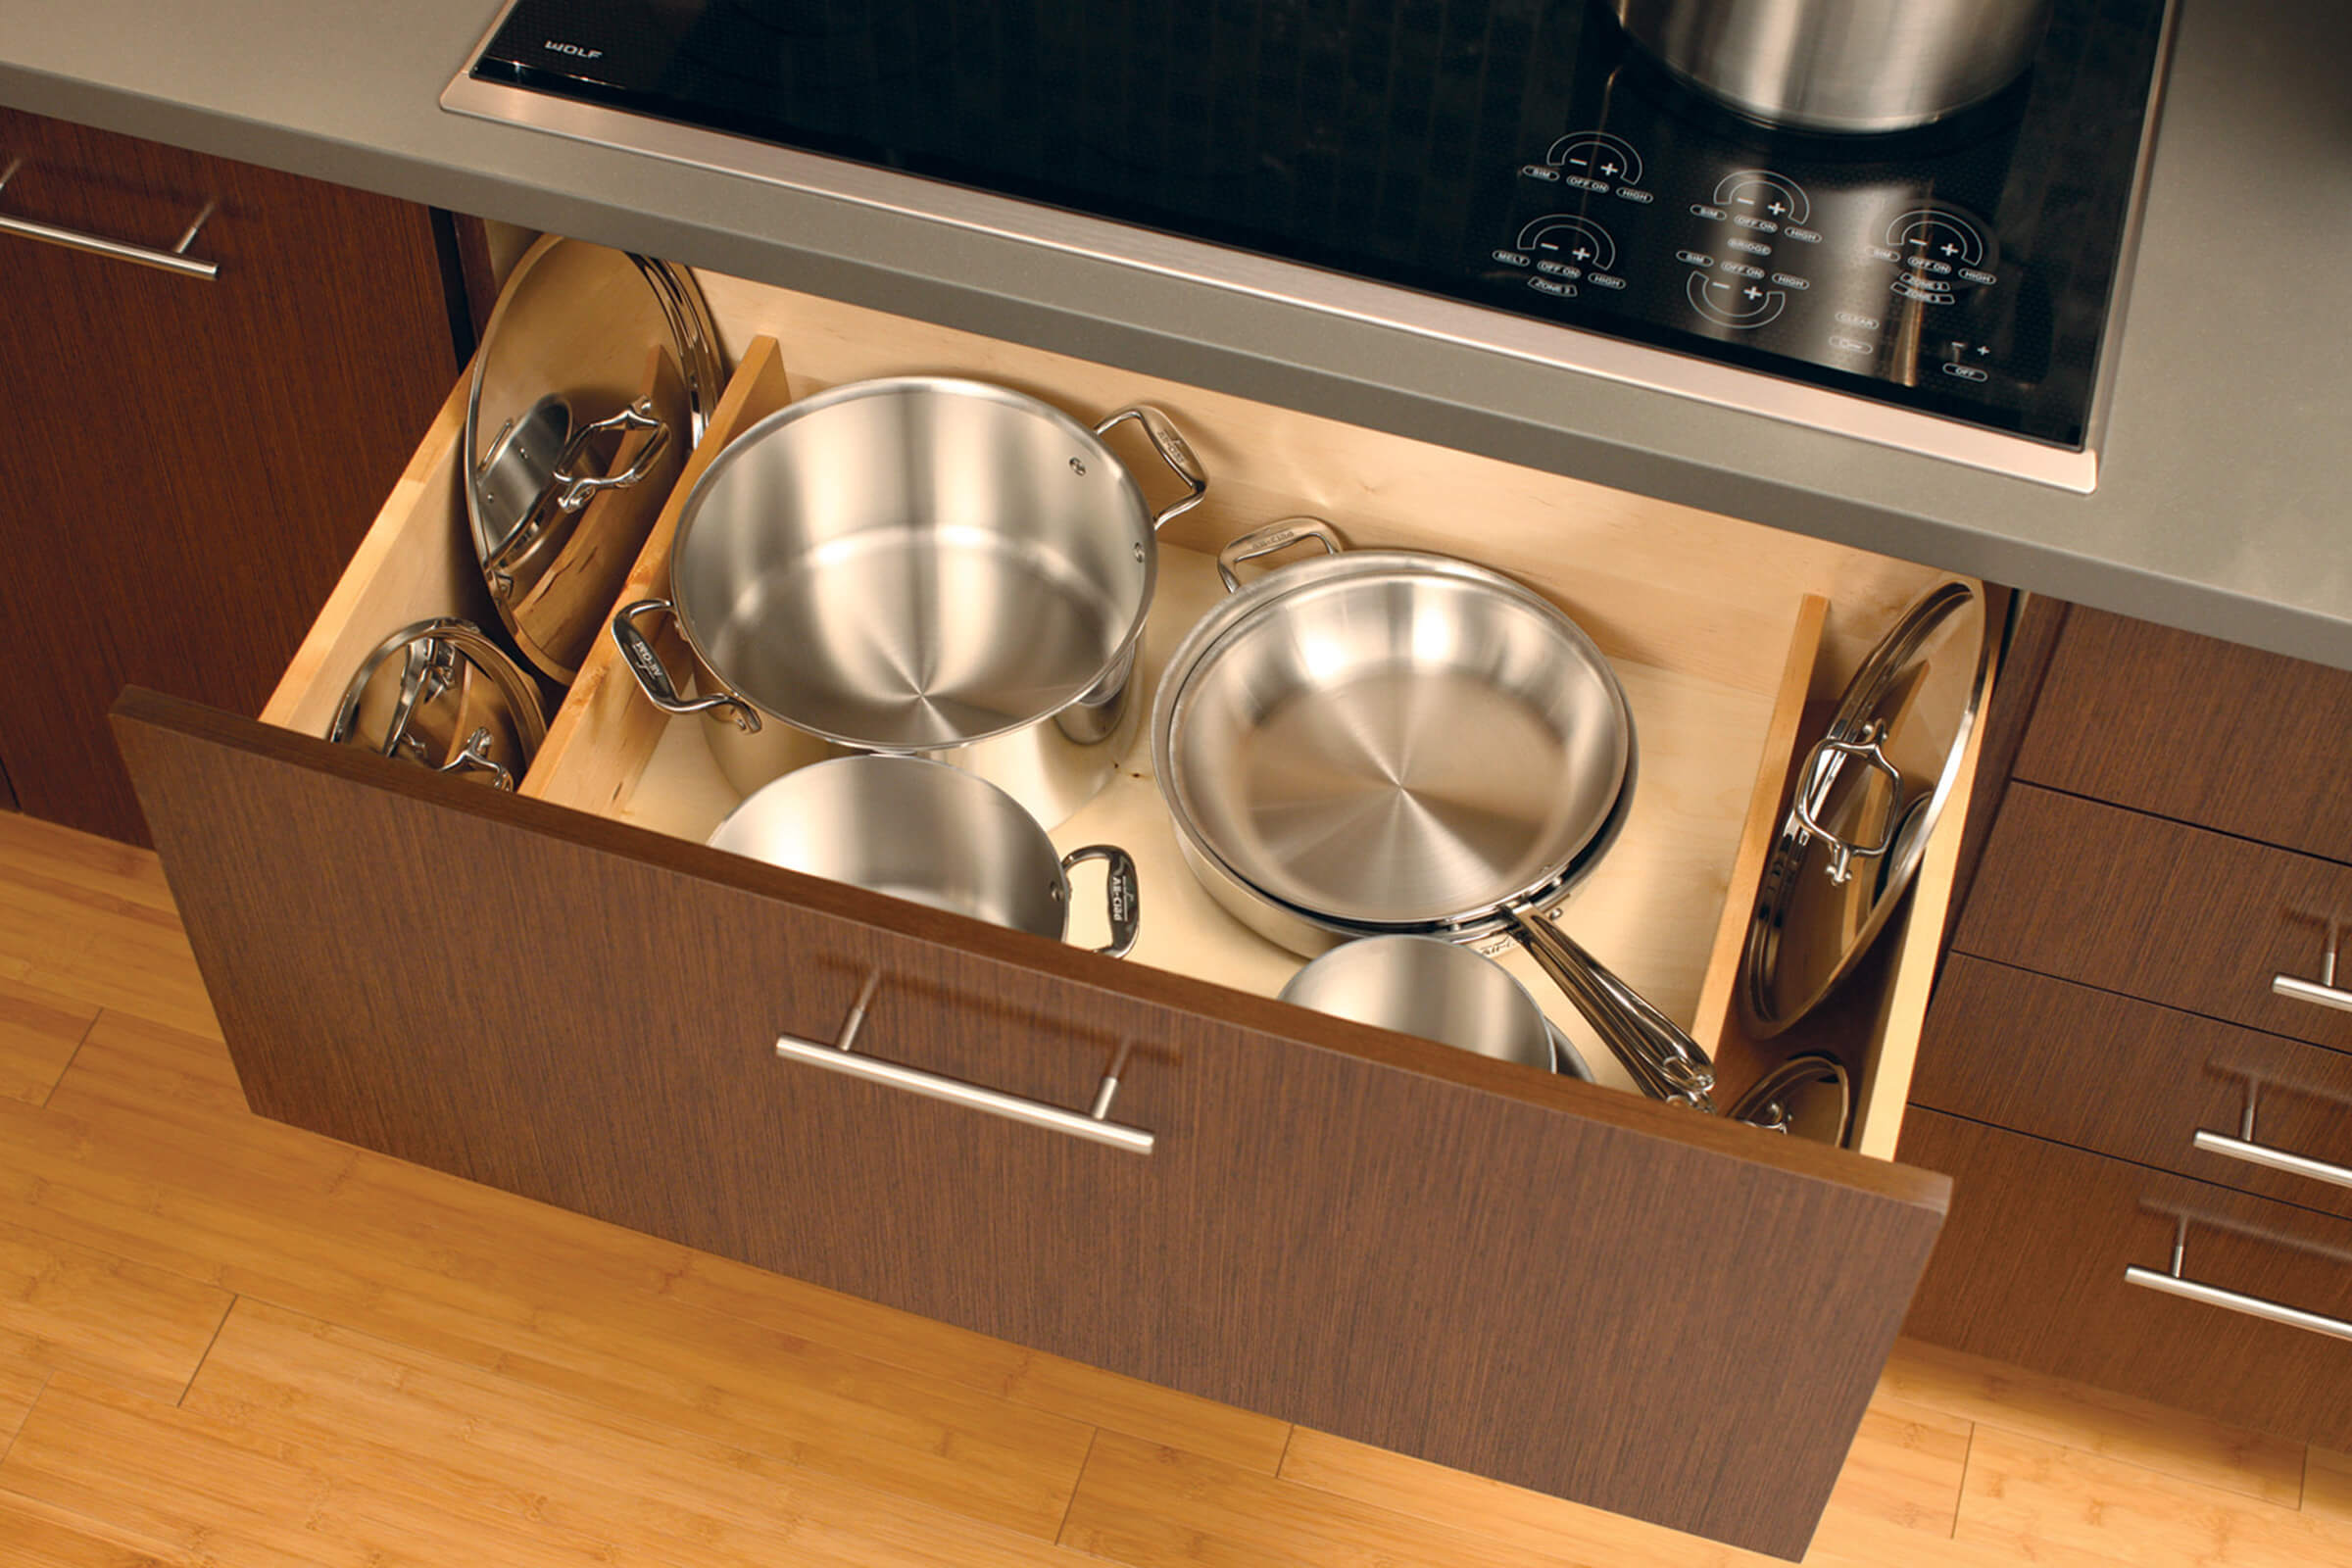 How to organize pot and pan lids with organized kitchen cabinet drawers. Lid Storage Partition storage accessory by Dura Supreme Cabinetry.